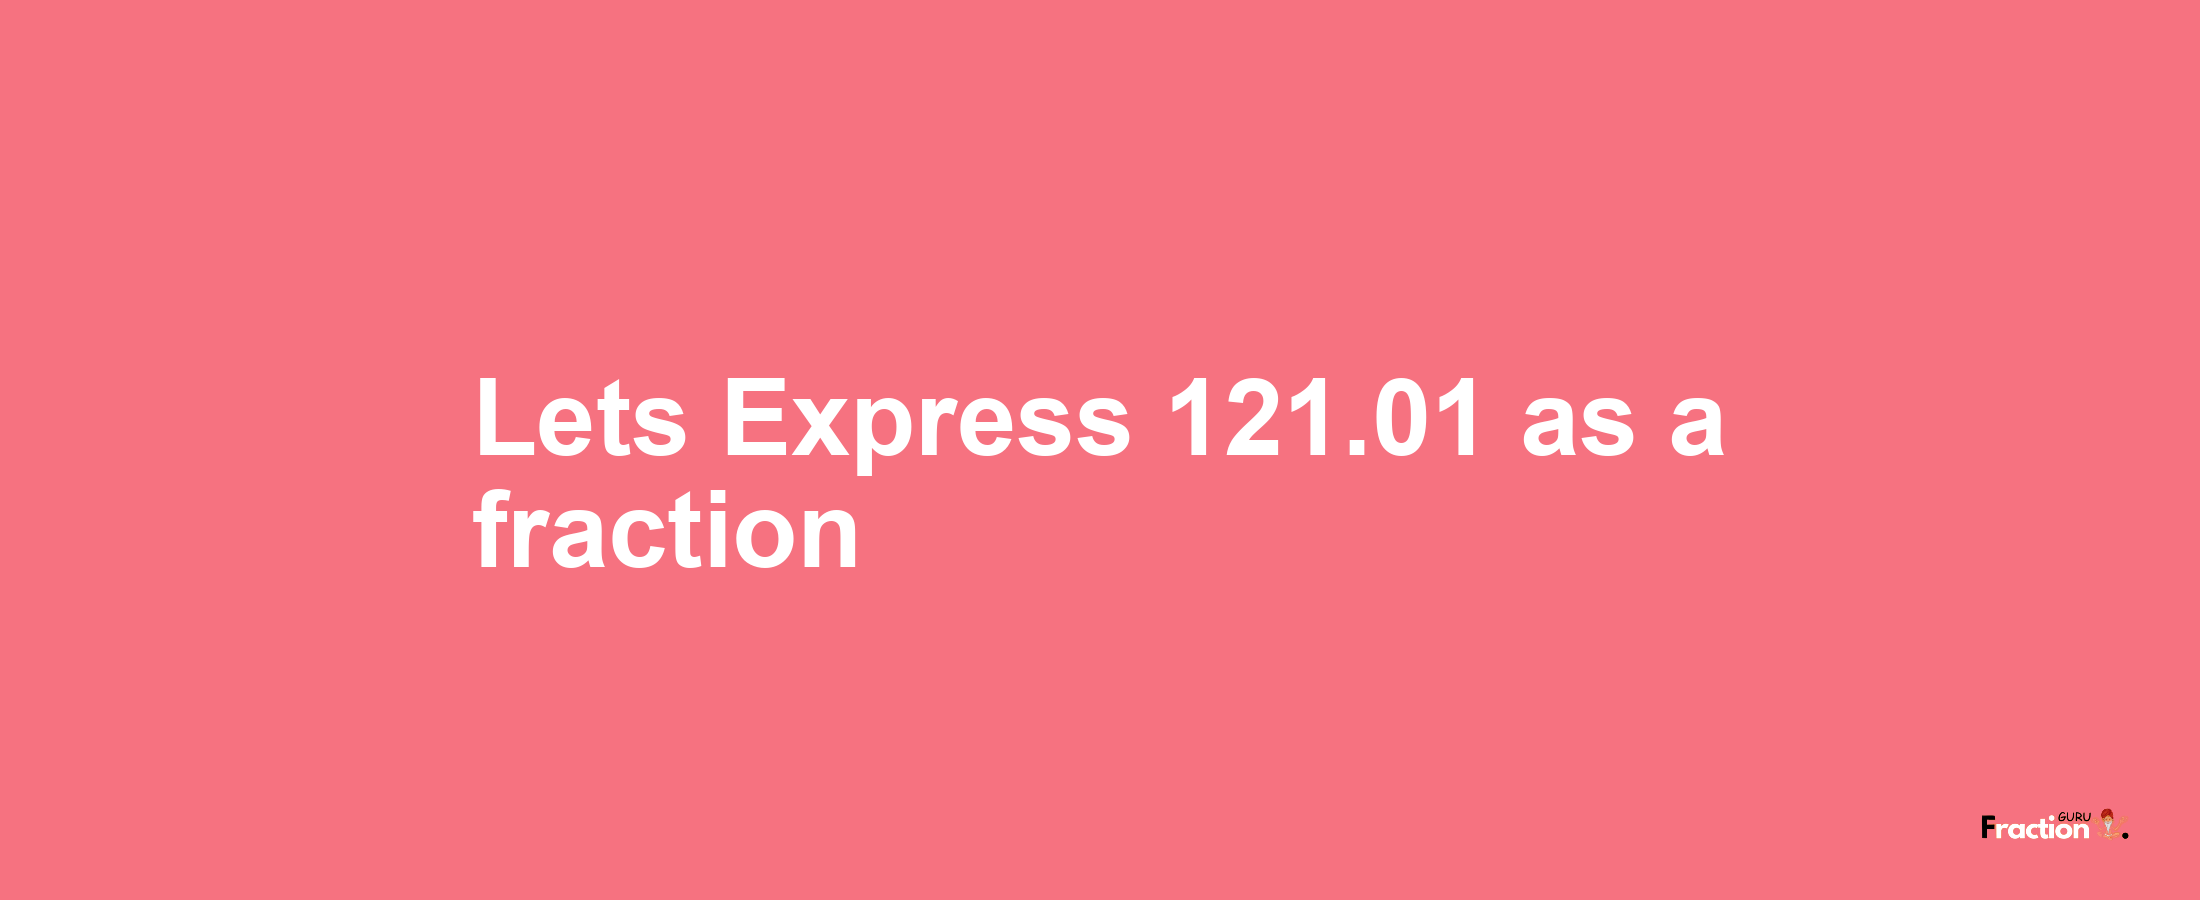 Lets Express 121.01 as afraction